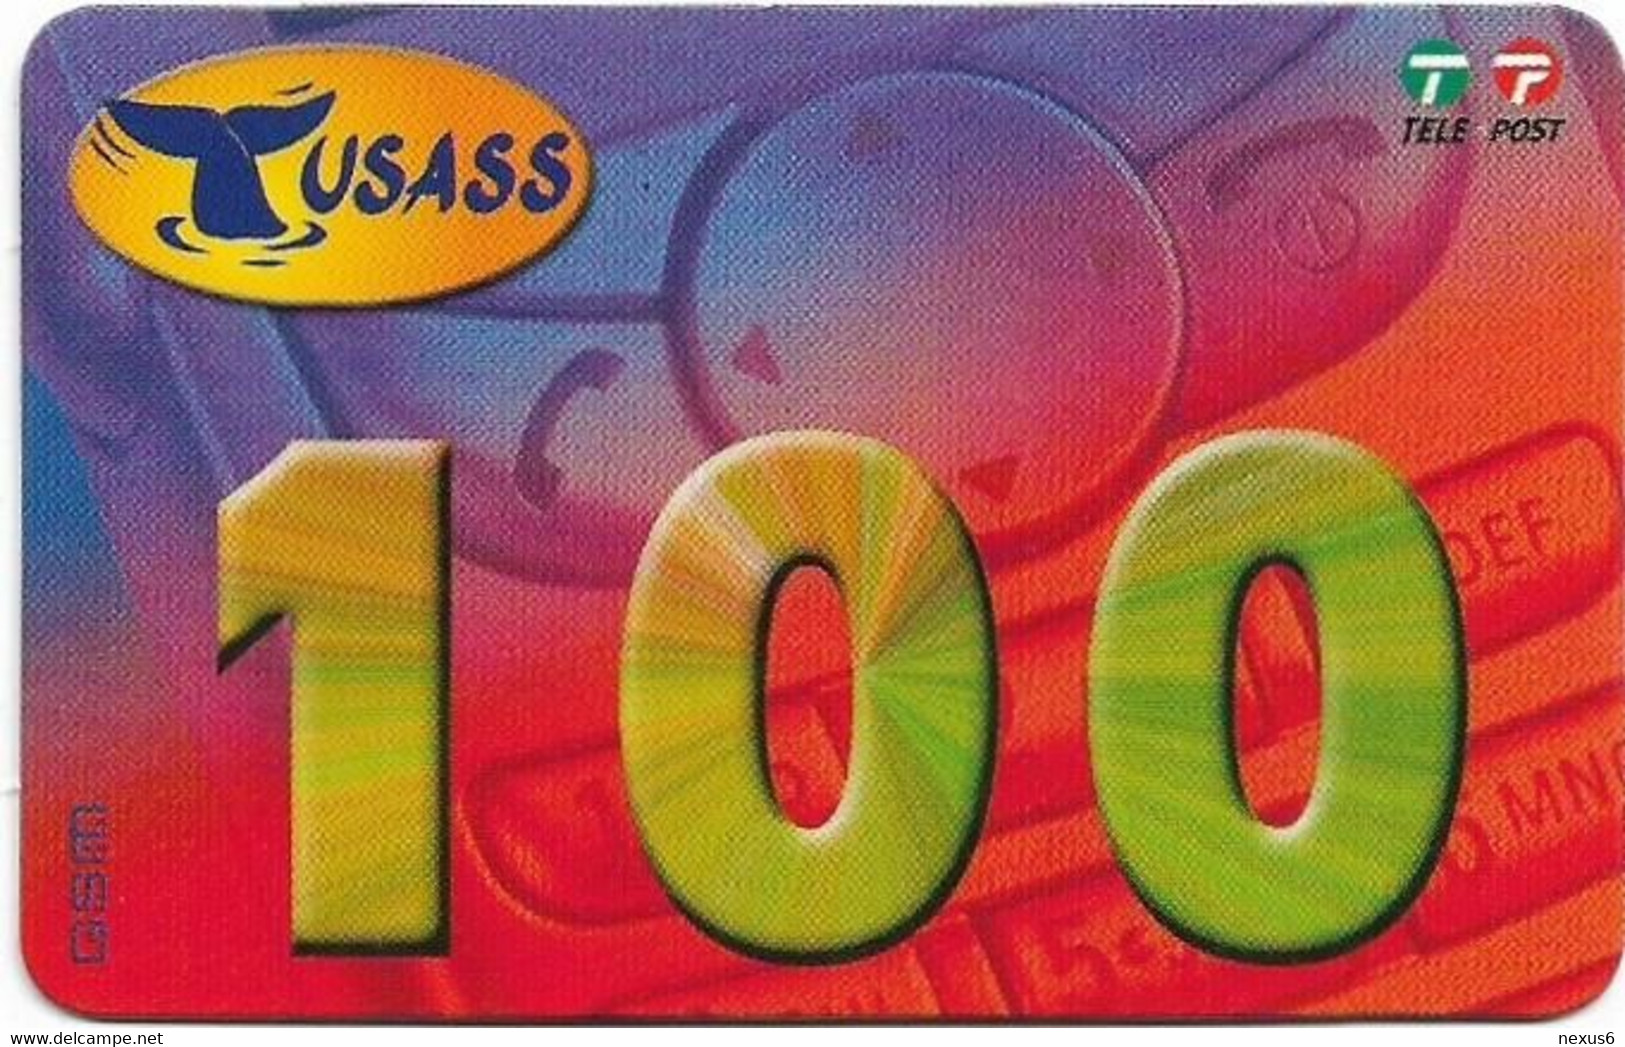 Greenland - Tusass - Purple Red Design, GSM Refill, 100kr. Exp. 01.09.2006, Used - Groenlandia